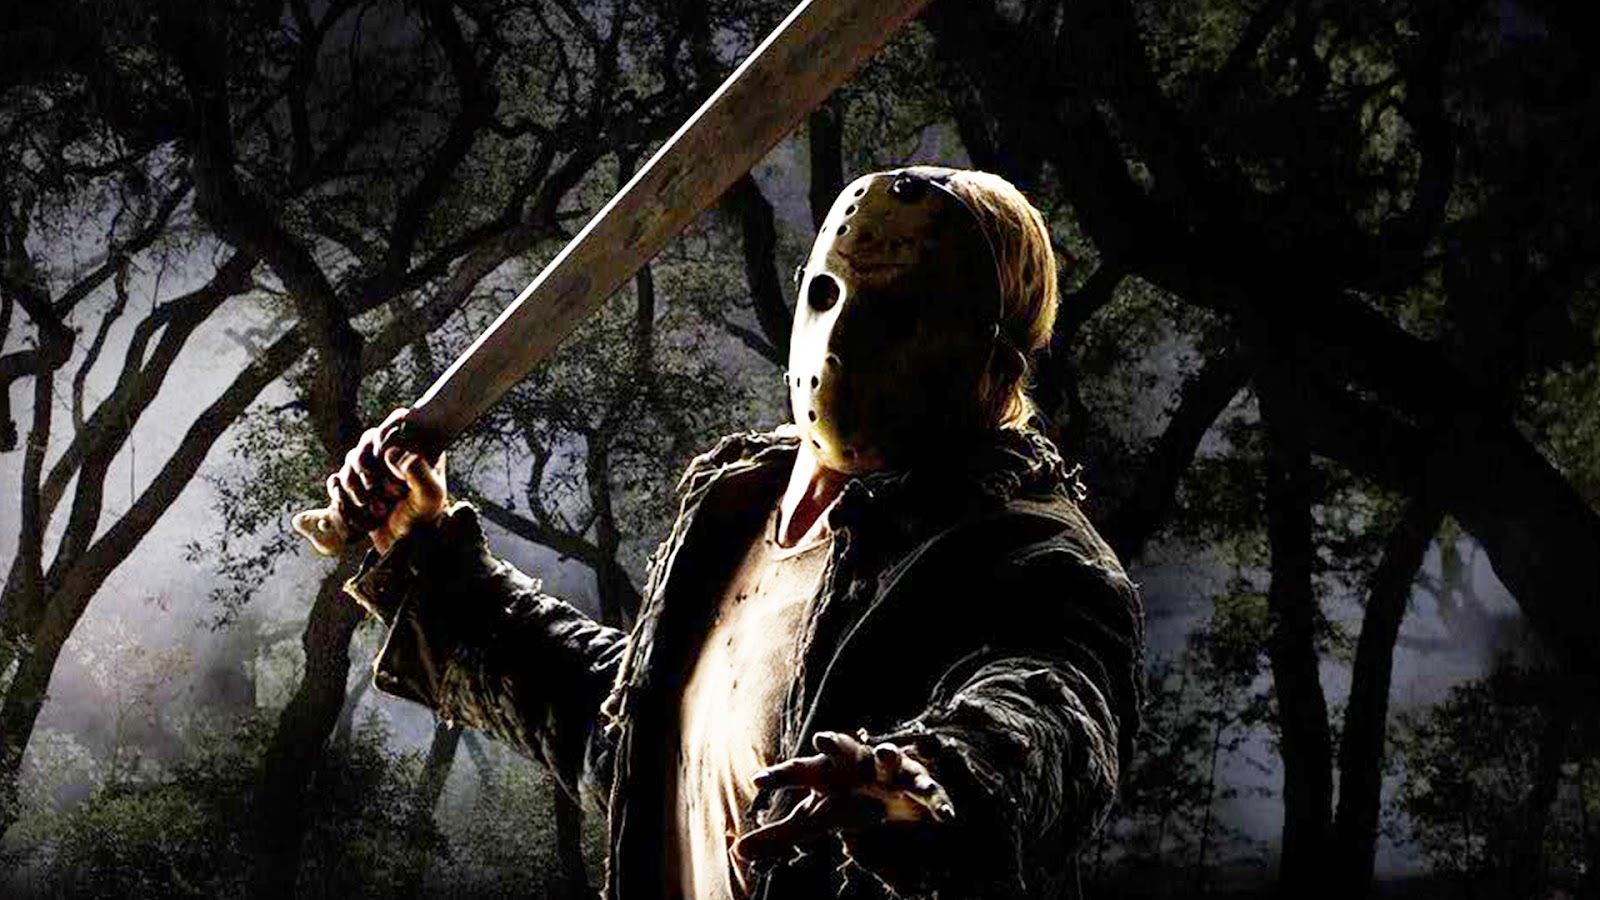 Best 50+ Friday the 13th Wallpapers 1920 X 1080 on HipWallpapers.